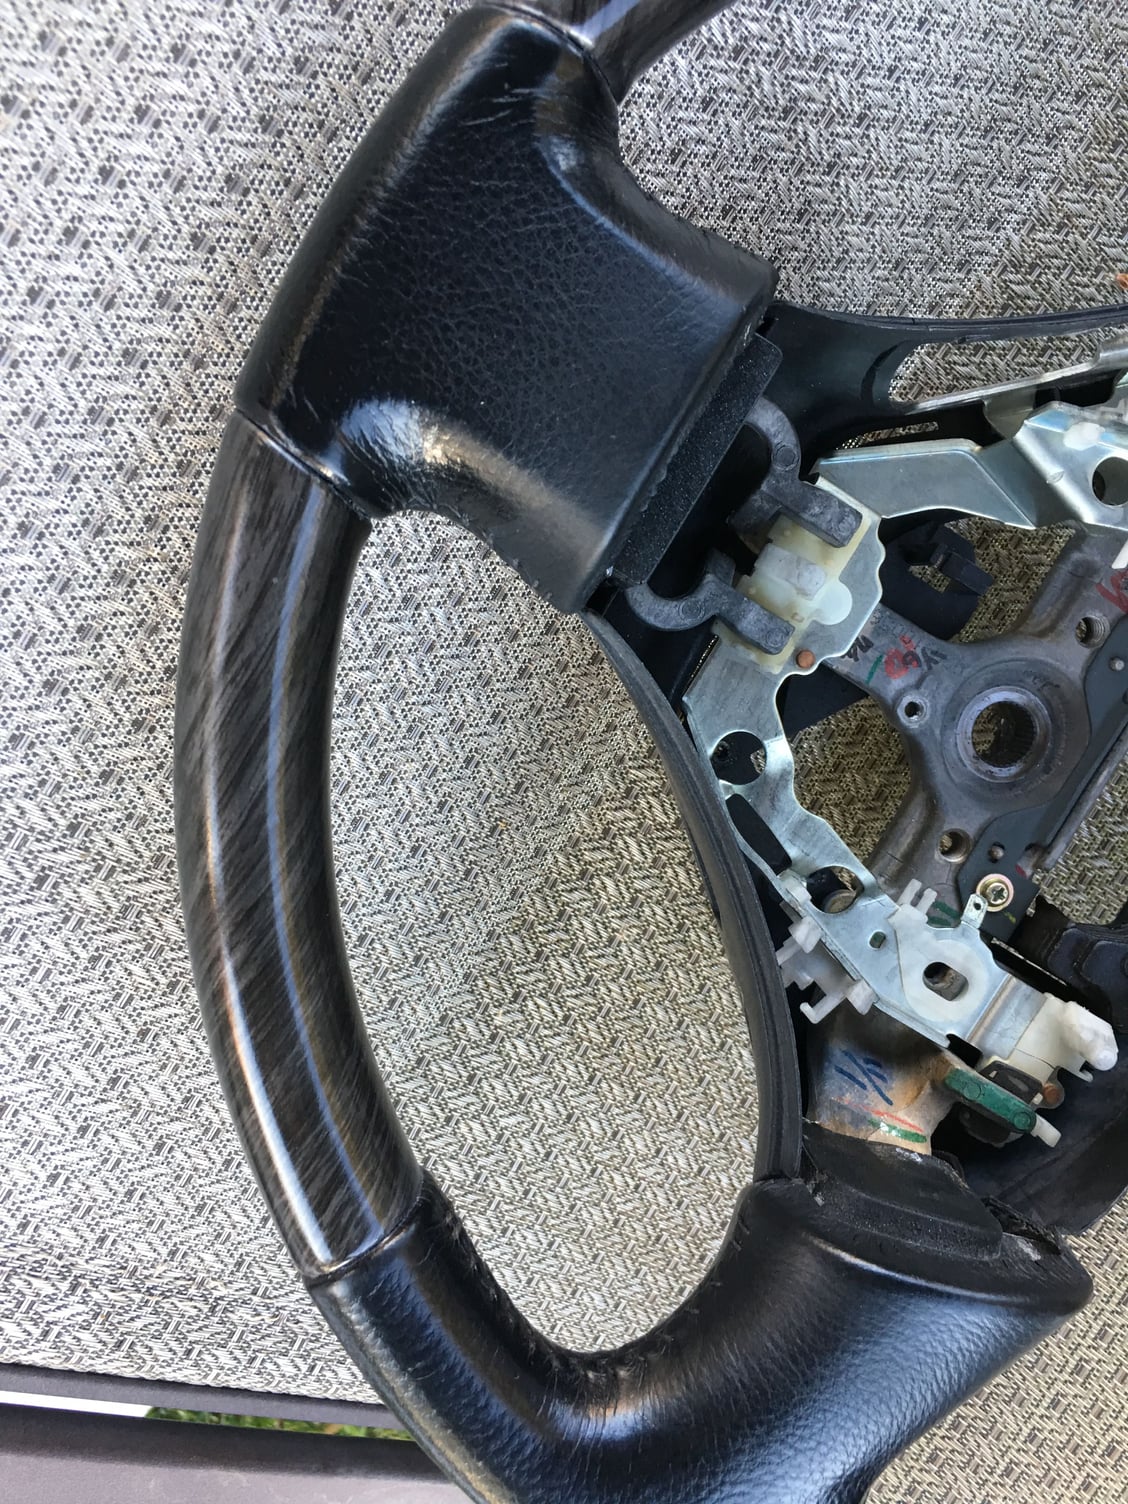 Interior/Upholstery - 2001 Gs430 hydro dipped wood steering wheel - Used - 1999 to 2005 Lexus GS430 - Midvale, UT 84047, United States